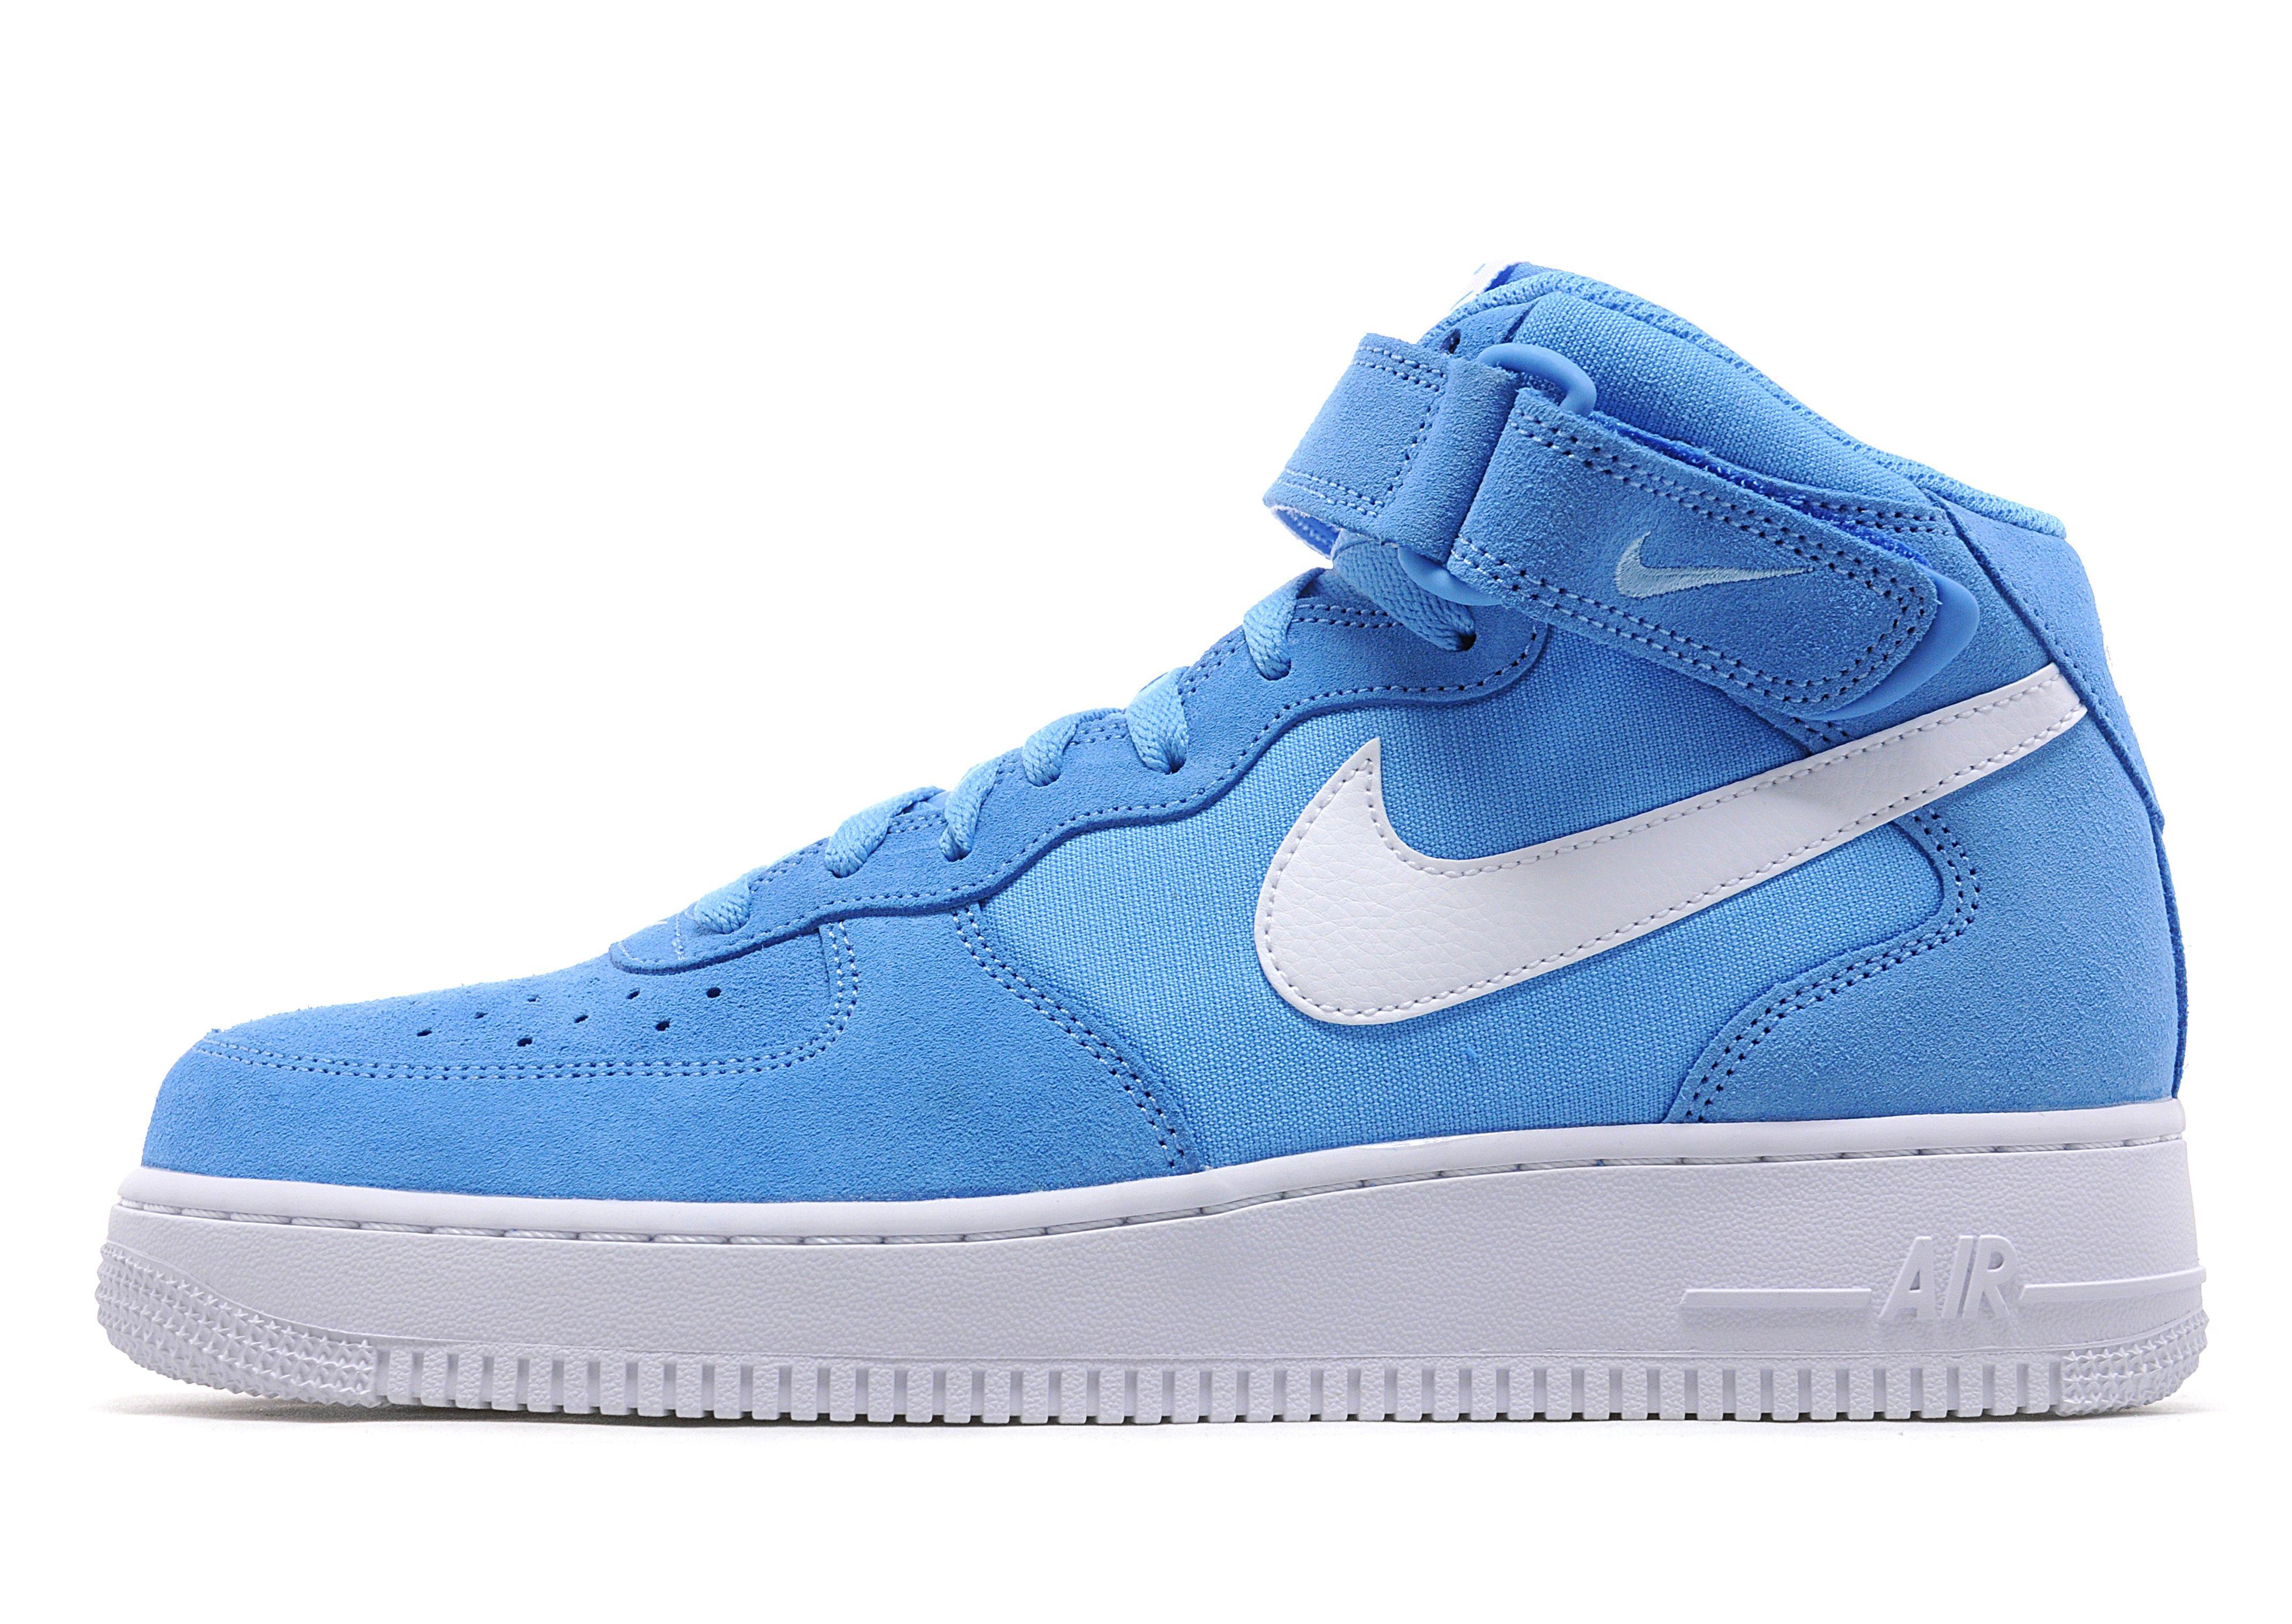 Nike Suede Air Force 1 Mid in University Blue/White (Blue) - Lyst